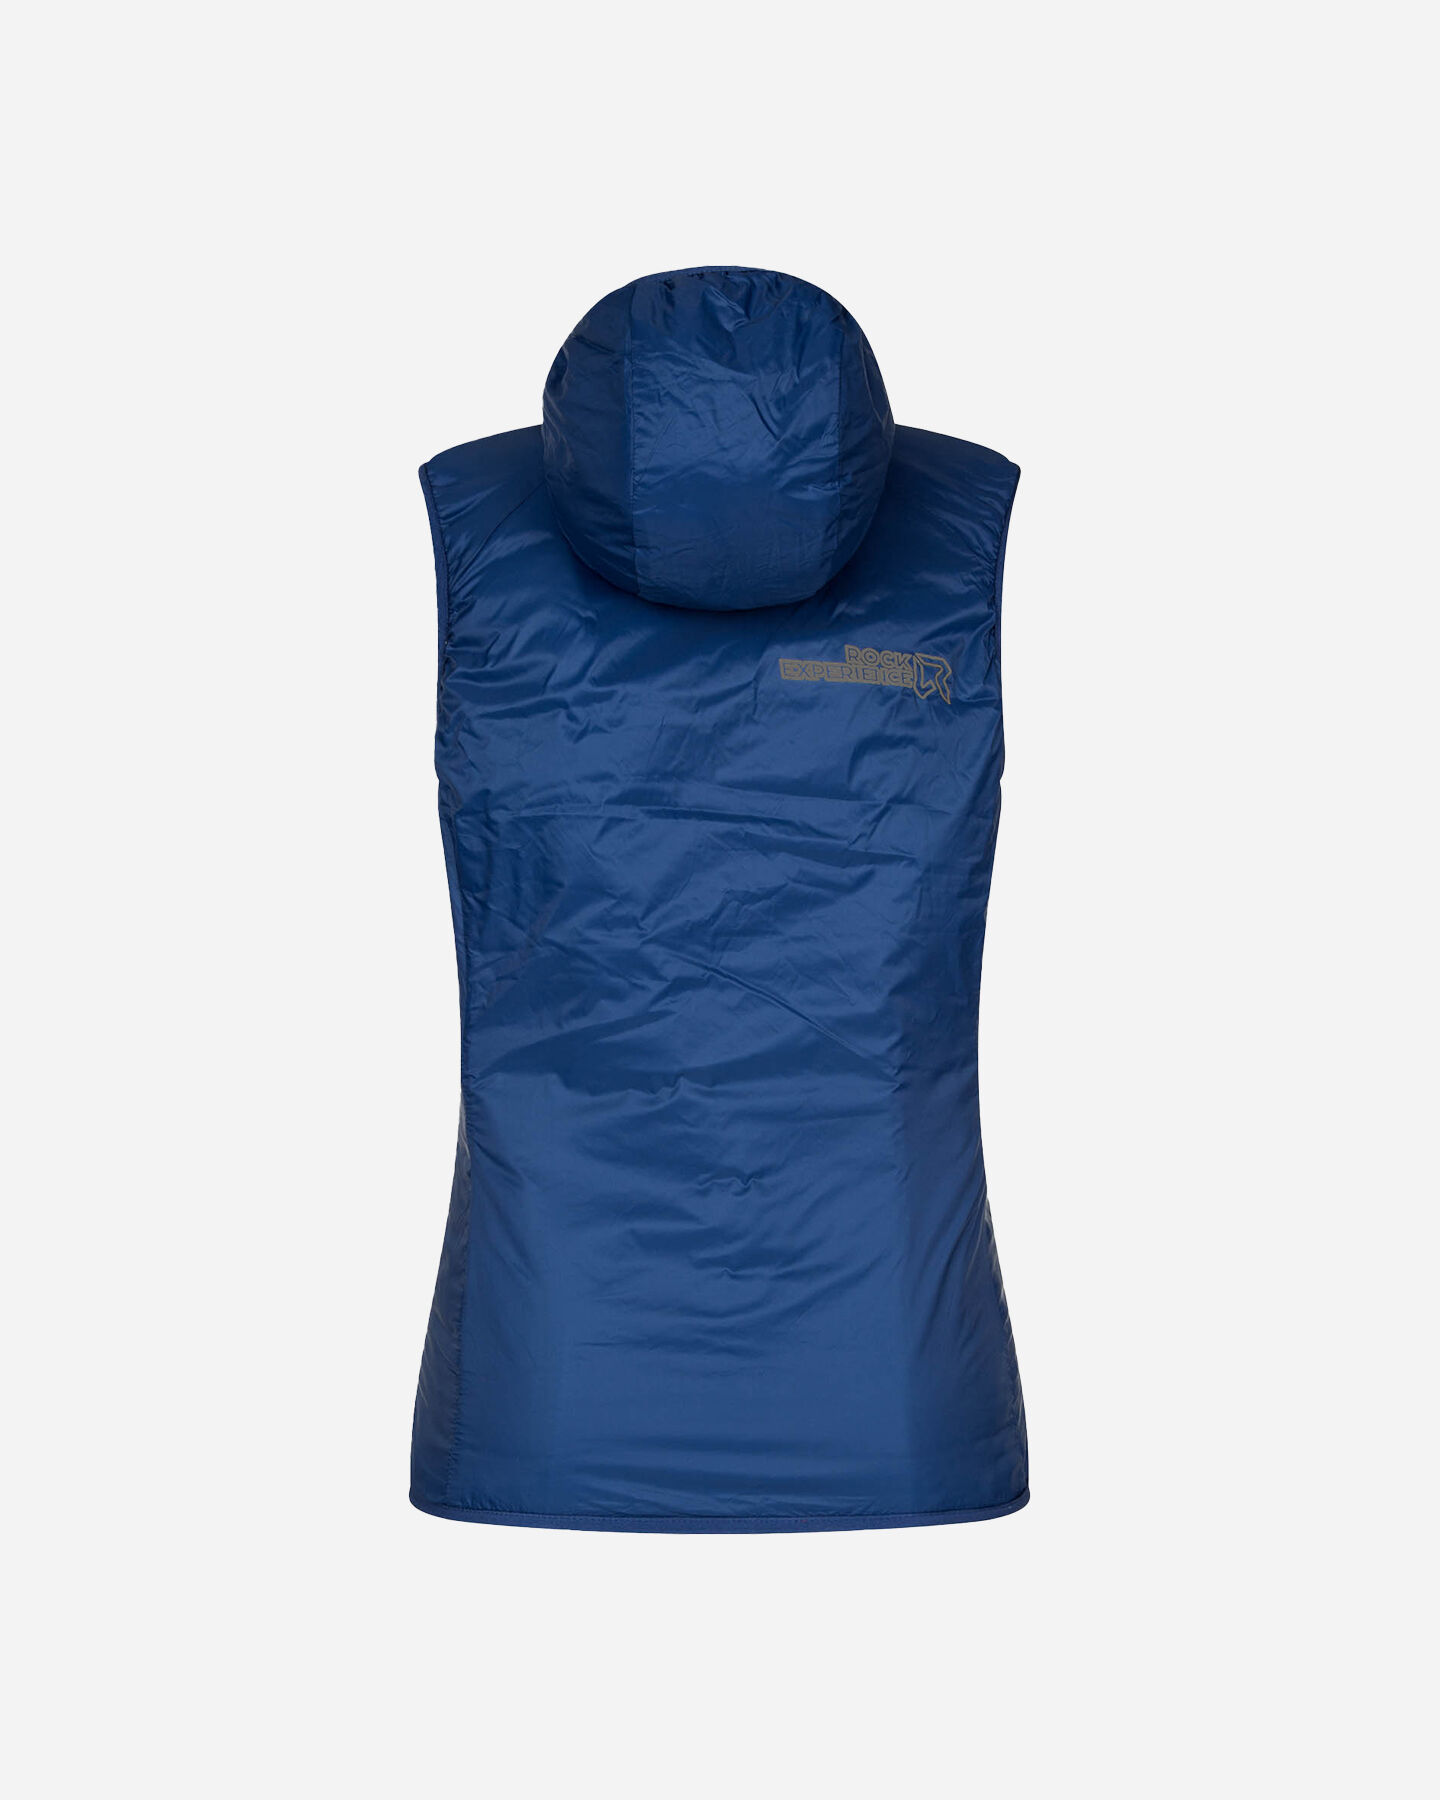  Gilet ROCK EXPERIENCE GOLDEN GATE W S4130502|2265|XS scatto 3